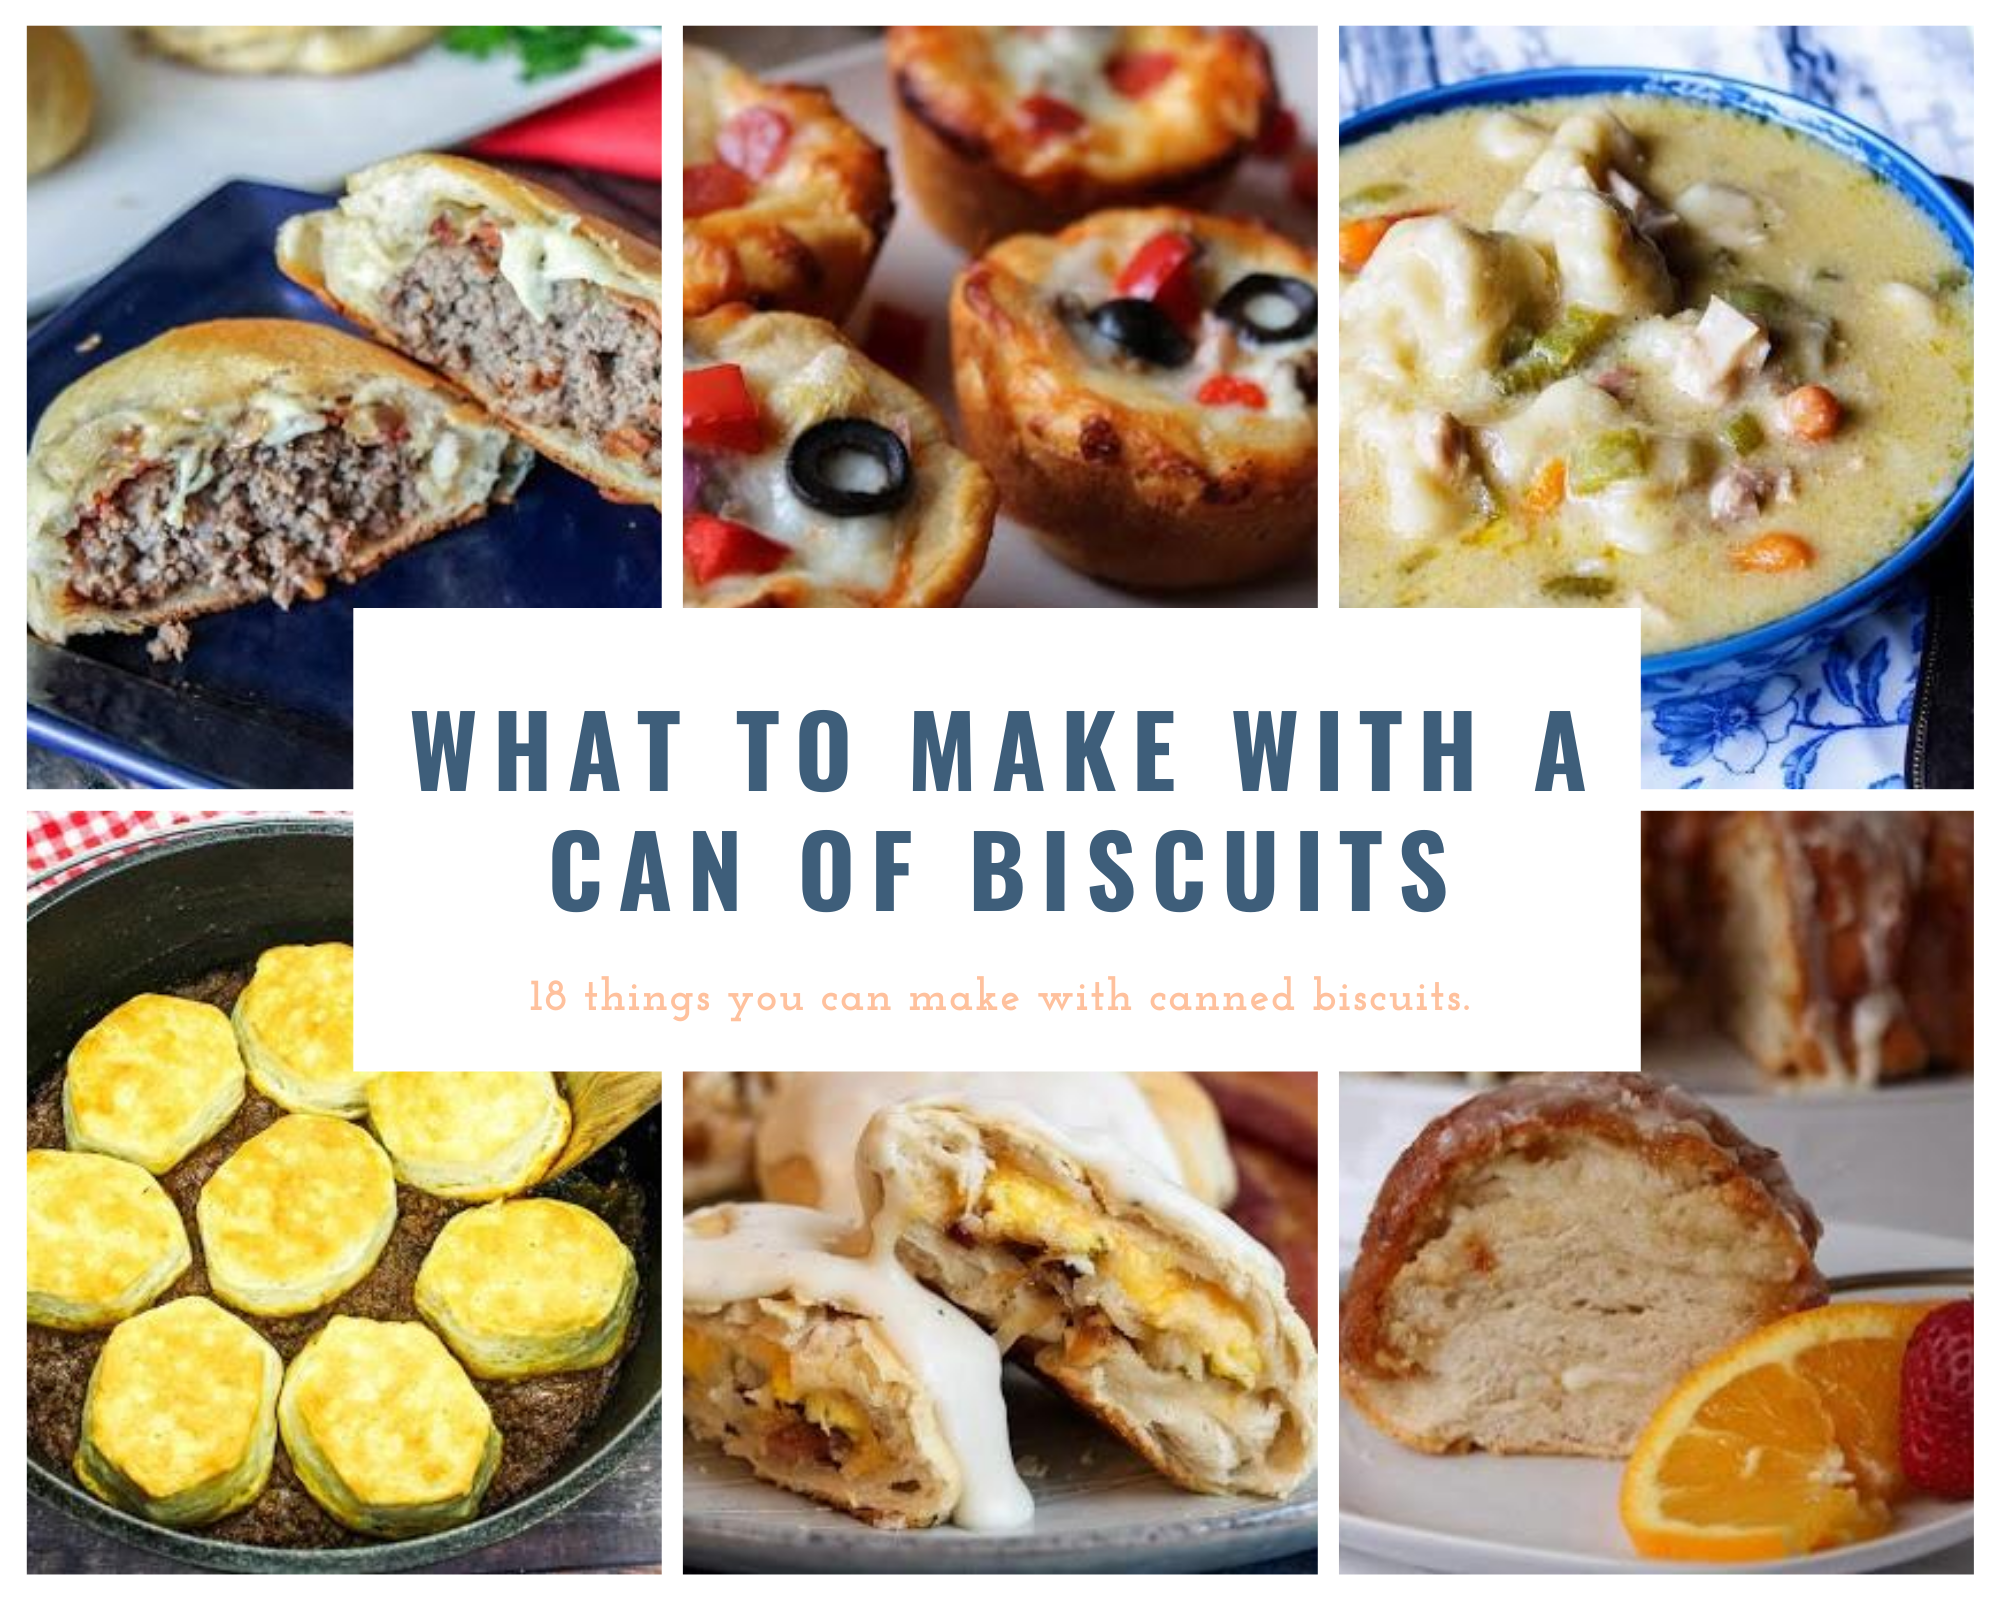 Breakfast, lunch, dinner and dessert recipes made with canned biscuits